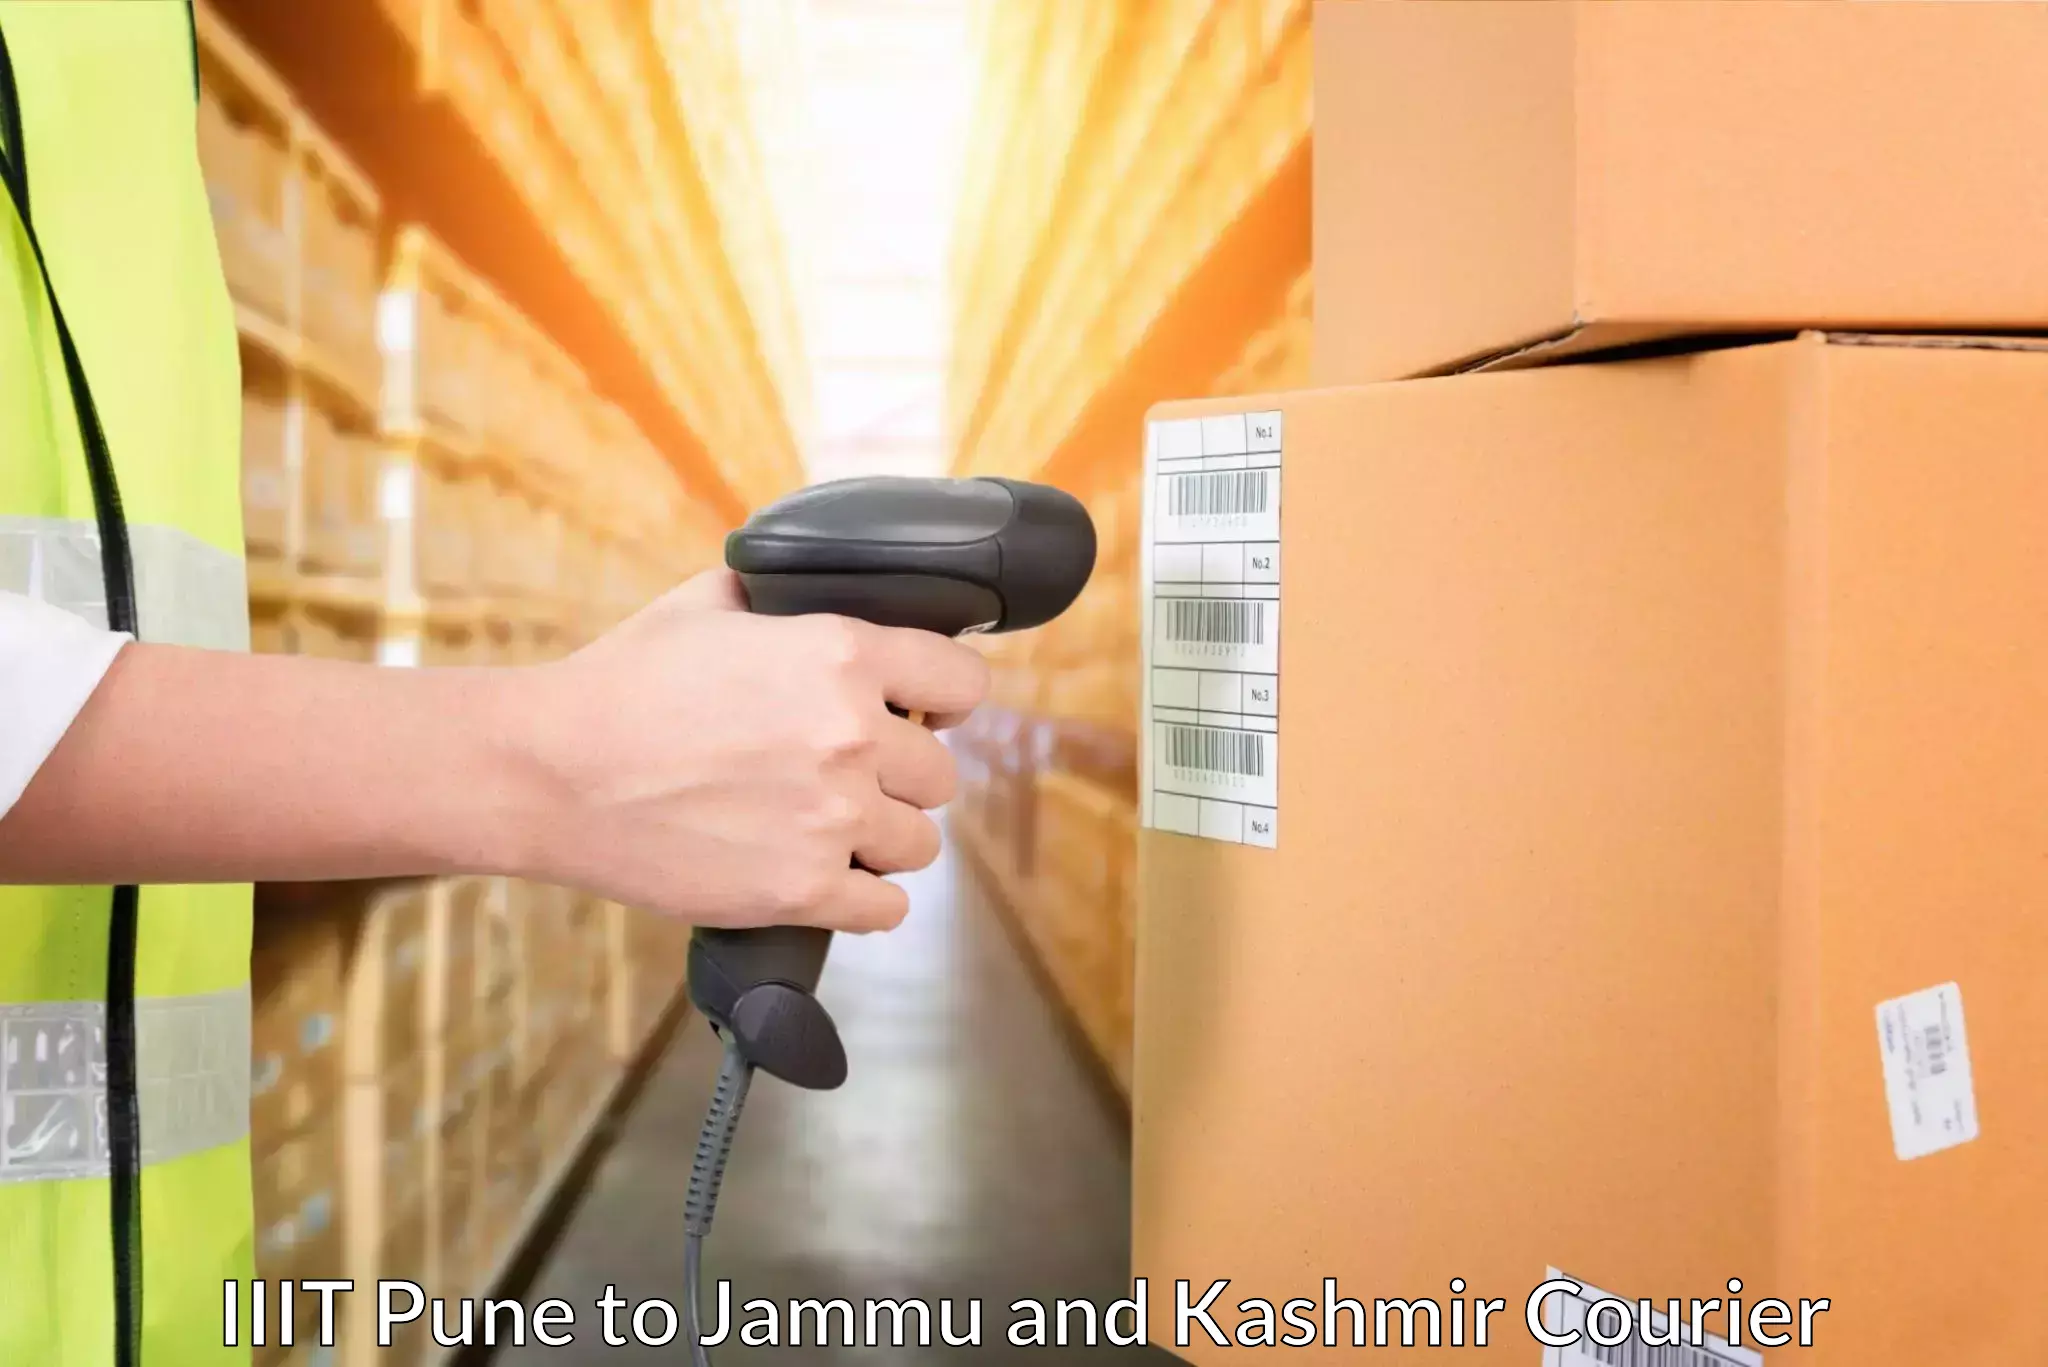 Courier service innovation IIIT Pune to Ramban